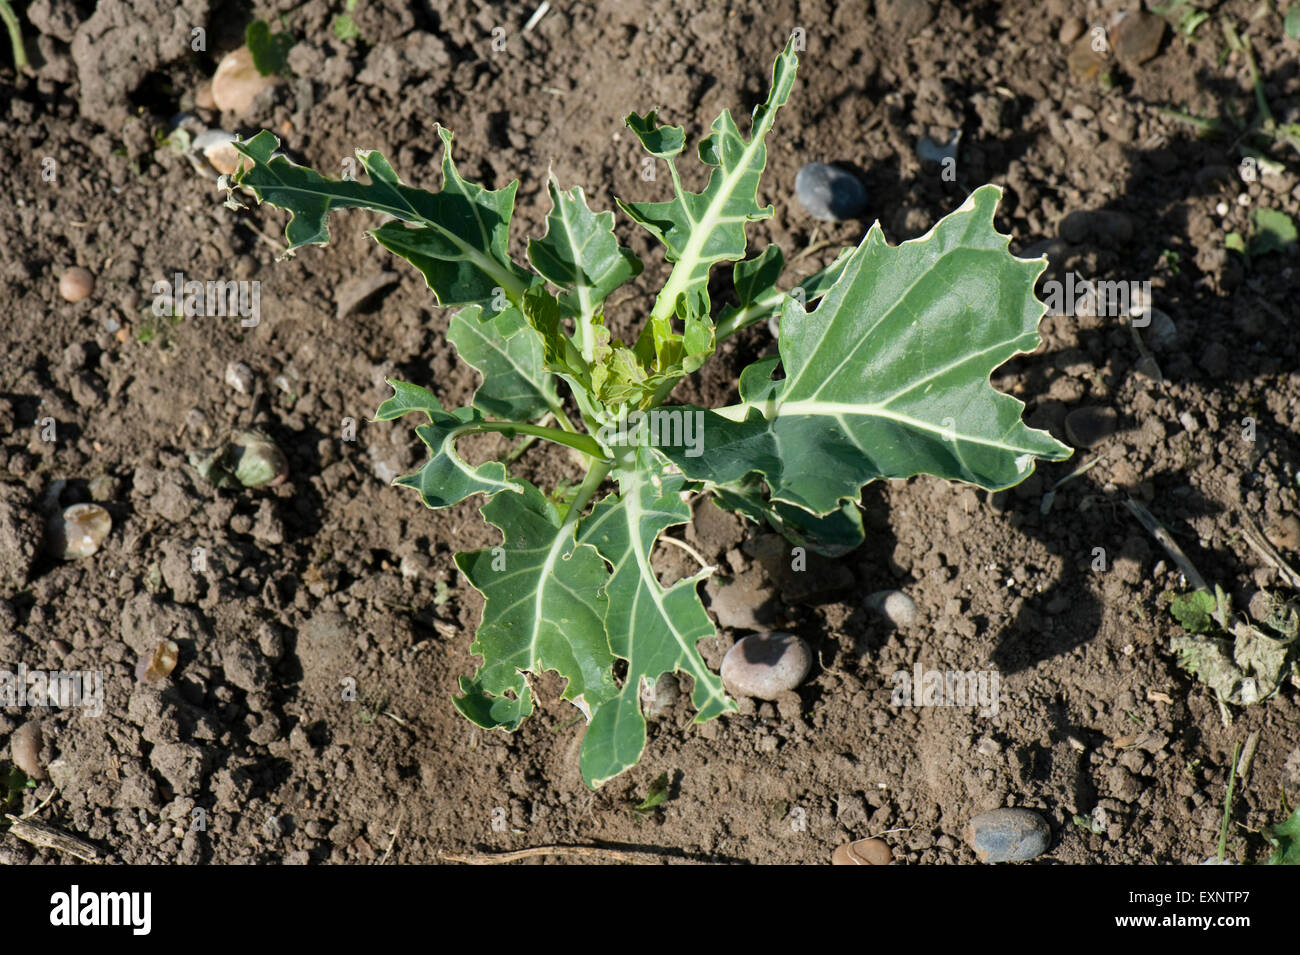 Young cabbage plants damaged, stripped and pecked by pigeons and other birds in a vegetable garden, Berkshire, May Stock Photo